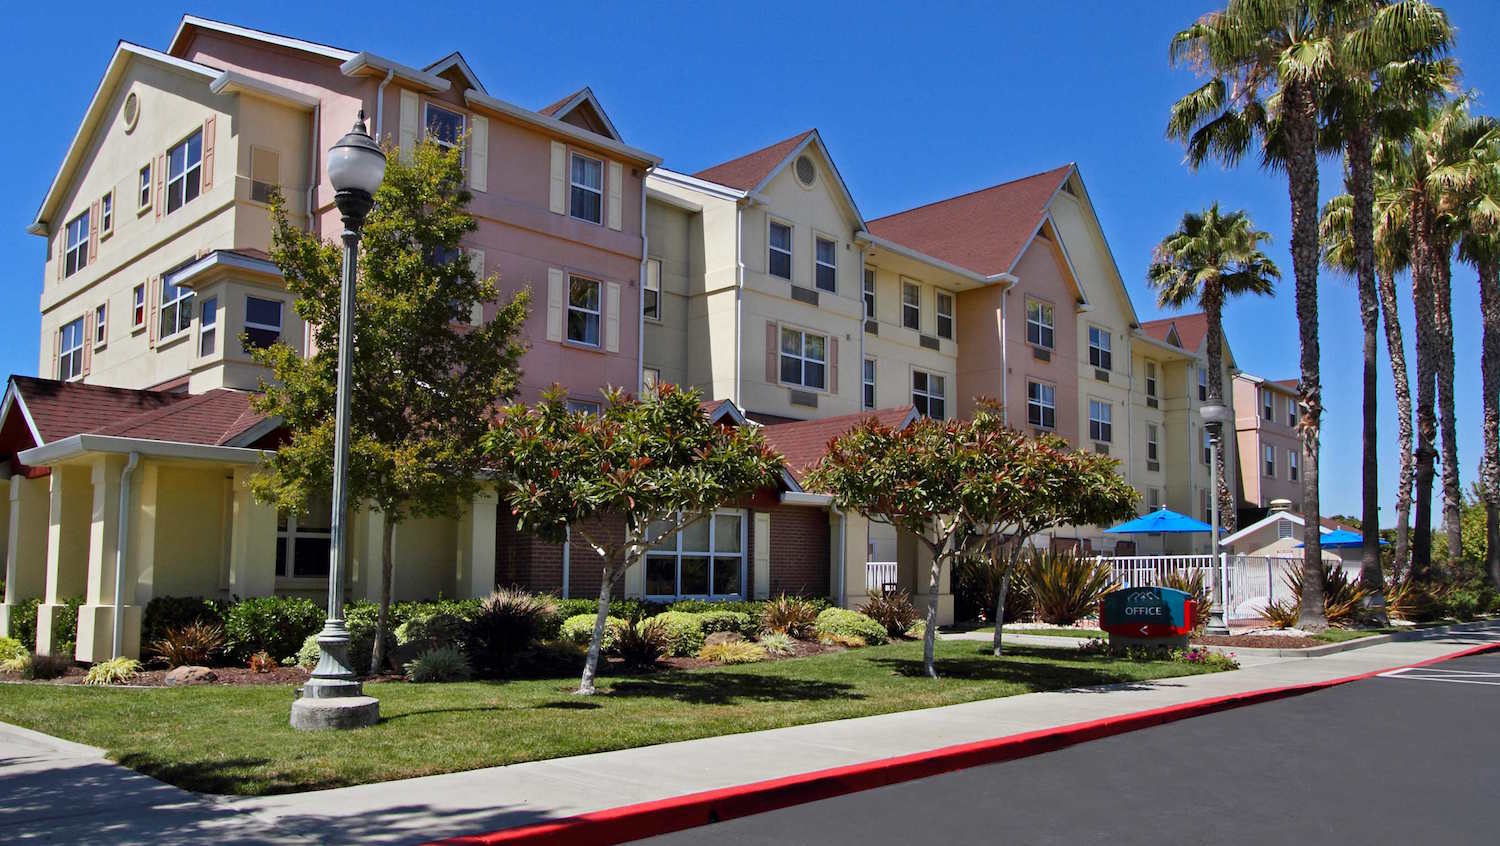 Photo of TownePlace Suites Newark Silicon Valley, Newark, CA